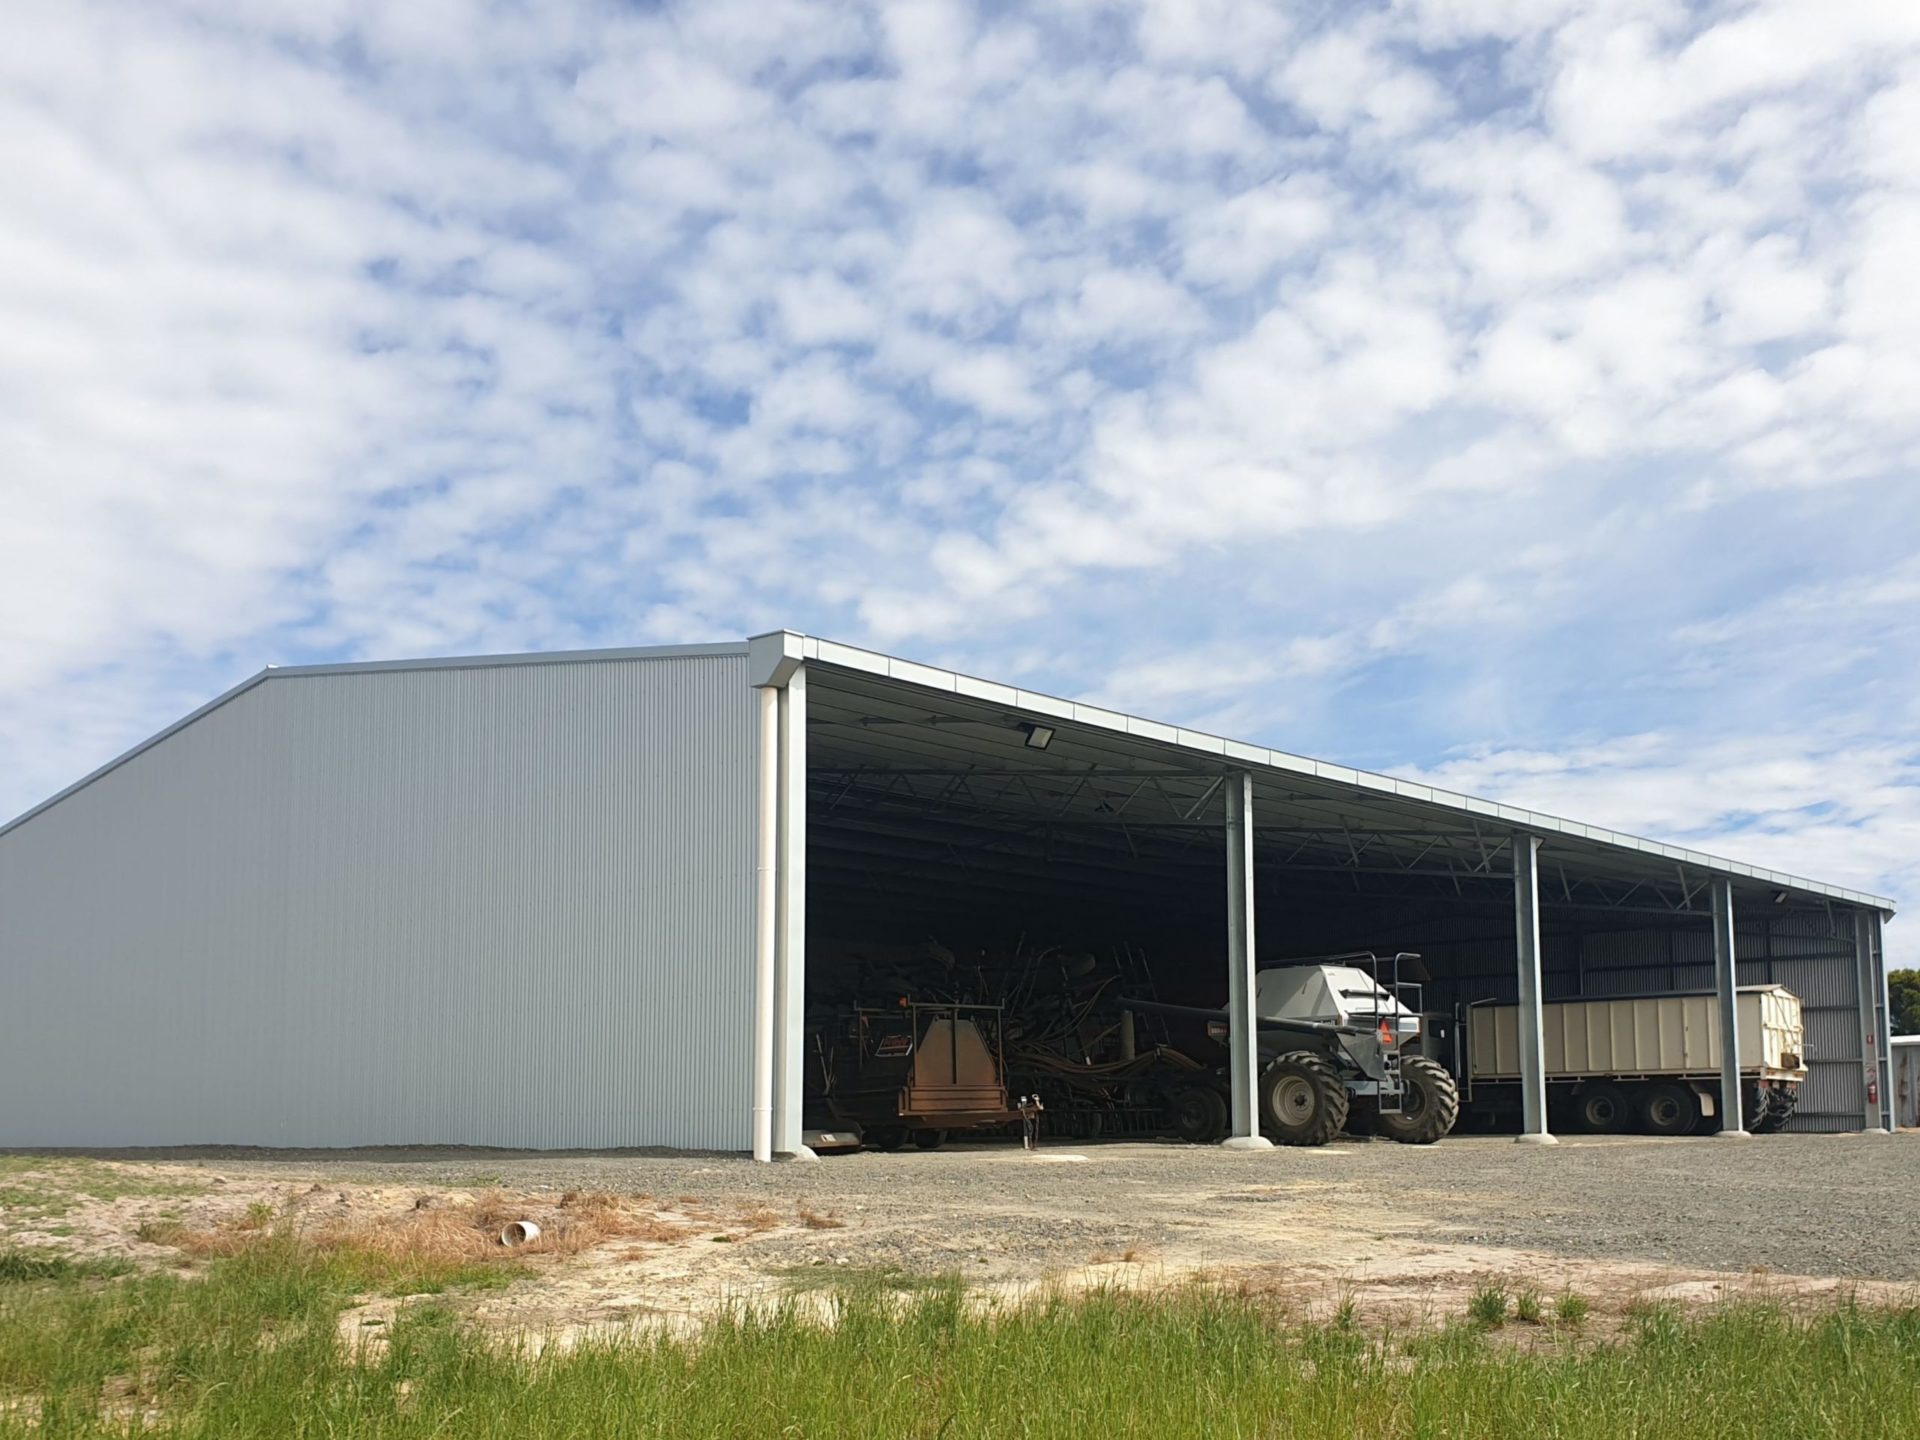 You are currently viewing 32m x 21m x 5m open-front machinery shed